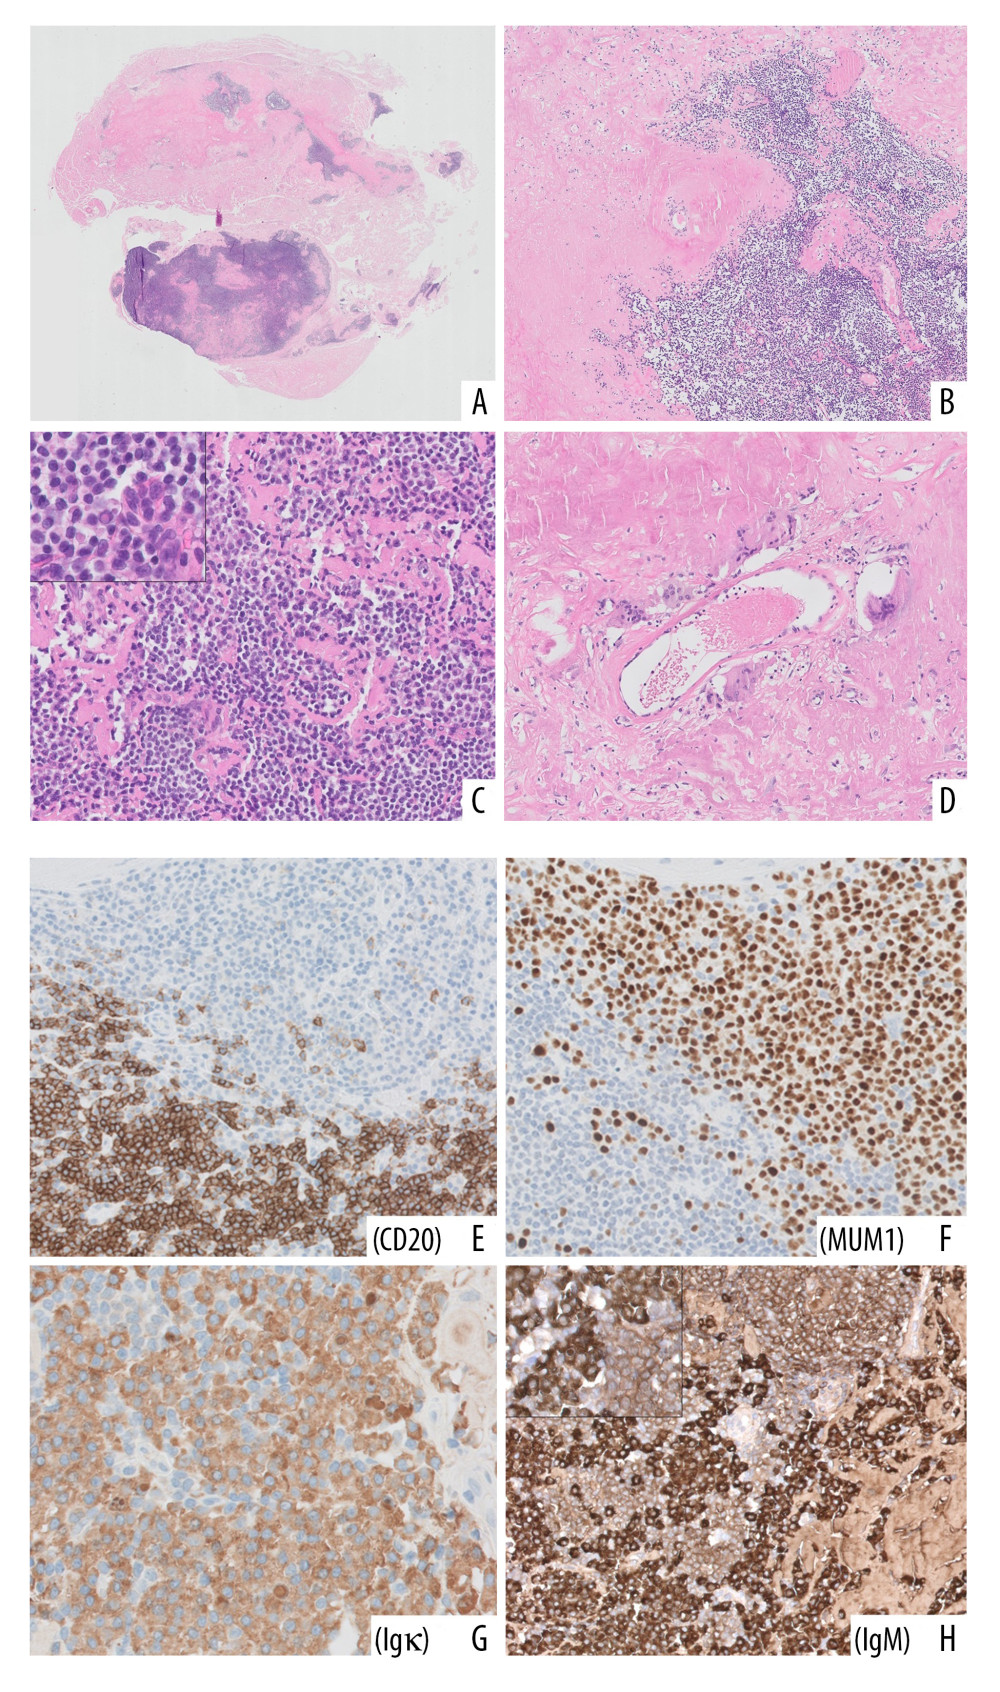 Histological and immunohistochemical features of the first excised subcutaneous lesion showing the LPL-associated amyloidoma. At low power, the abundant amorphous, glassy pink material permeating the fibro-fatty subcutaneous tissue is readily appreciable (A: Hematoxylin and eosin (H&E) ×20) and it appears intimately admixed with a patchy cellular infiltrate (B: H&E ×50). A higher-power view (C: H&E ×200) allows identification of a mixed population of small lymphocytes, plasma cells, and plasmacytoid lymphocytes, with numerous Dutcher bodies (inset: ×600). Peripherally, one can also notice multinucleated giant cells of foreign body type surrounding thin-walled vessels (D: H&E ×100). Immunohistochemical (IHC) studies confirm the presence of a dual population of small CD20+ B lymphocytes (E: CD20 IHC ×200) and MUM1+ plasmacytic-differentiated elements (F: MUM1 IHC ×200). The whole lymphoplasmacytic population shows Ig κ light-chain restriction (G: Ig k IHC ×400), as well as restricted IgM production (H: IgM IHC ×200) with strong cytoplasmic positivity in the plasma cell component and weaker membranous positivity in the lymphocytic plus plasmacytoid component (inset: ×600, with a nicely stained Dutcher body); IgM immunoreactivity can also be appreciated in the interspersed acellular material.